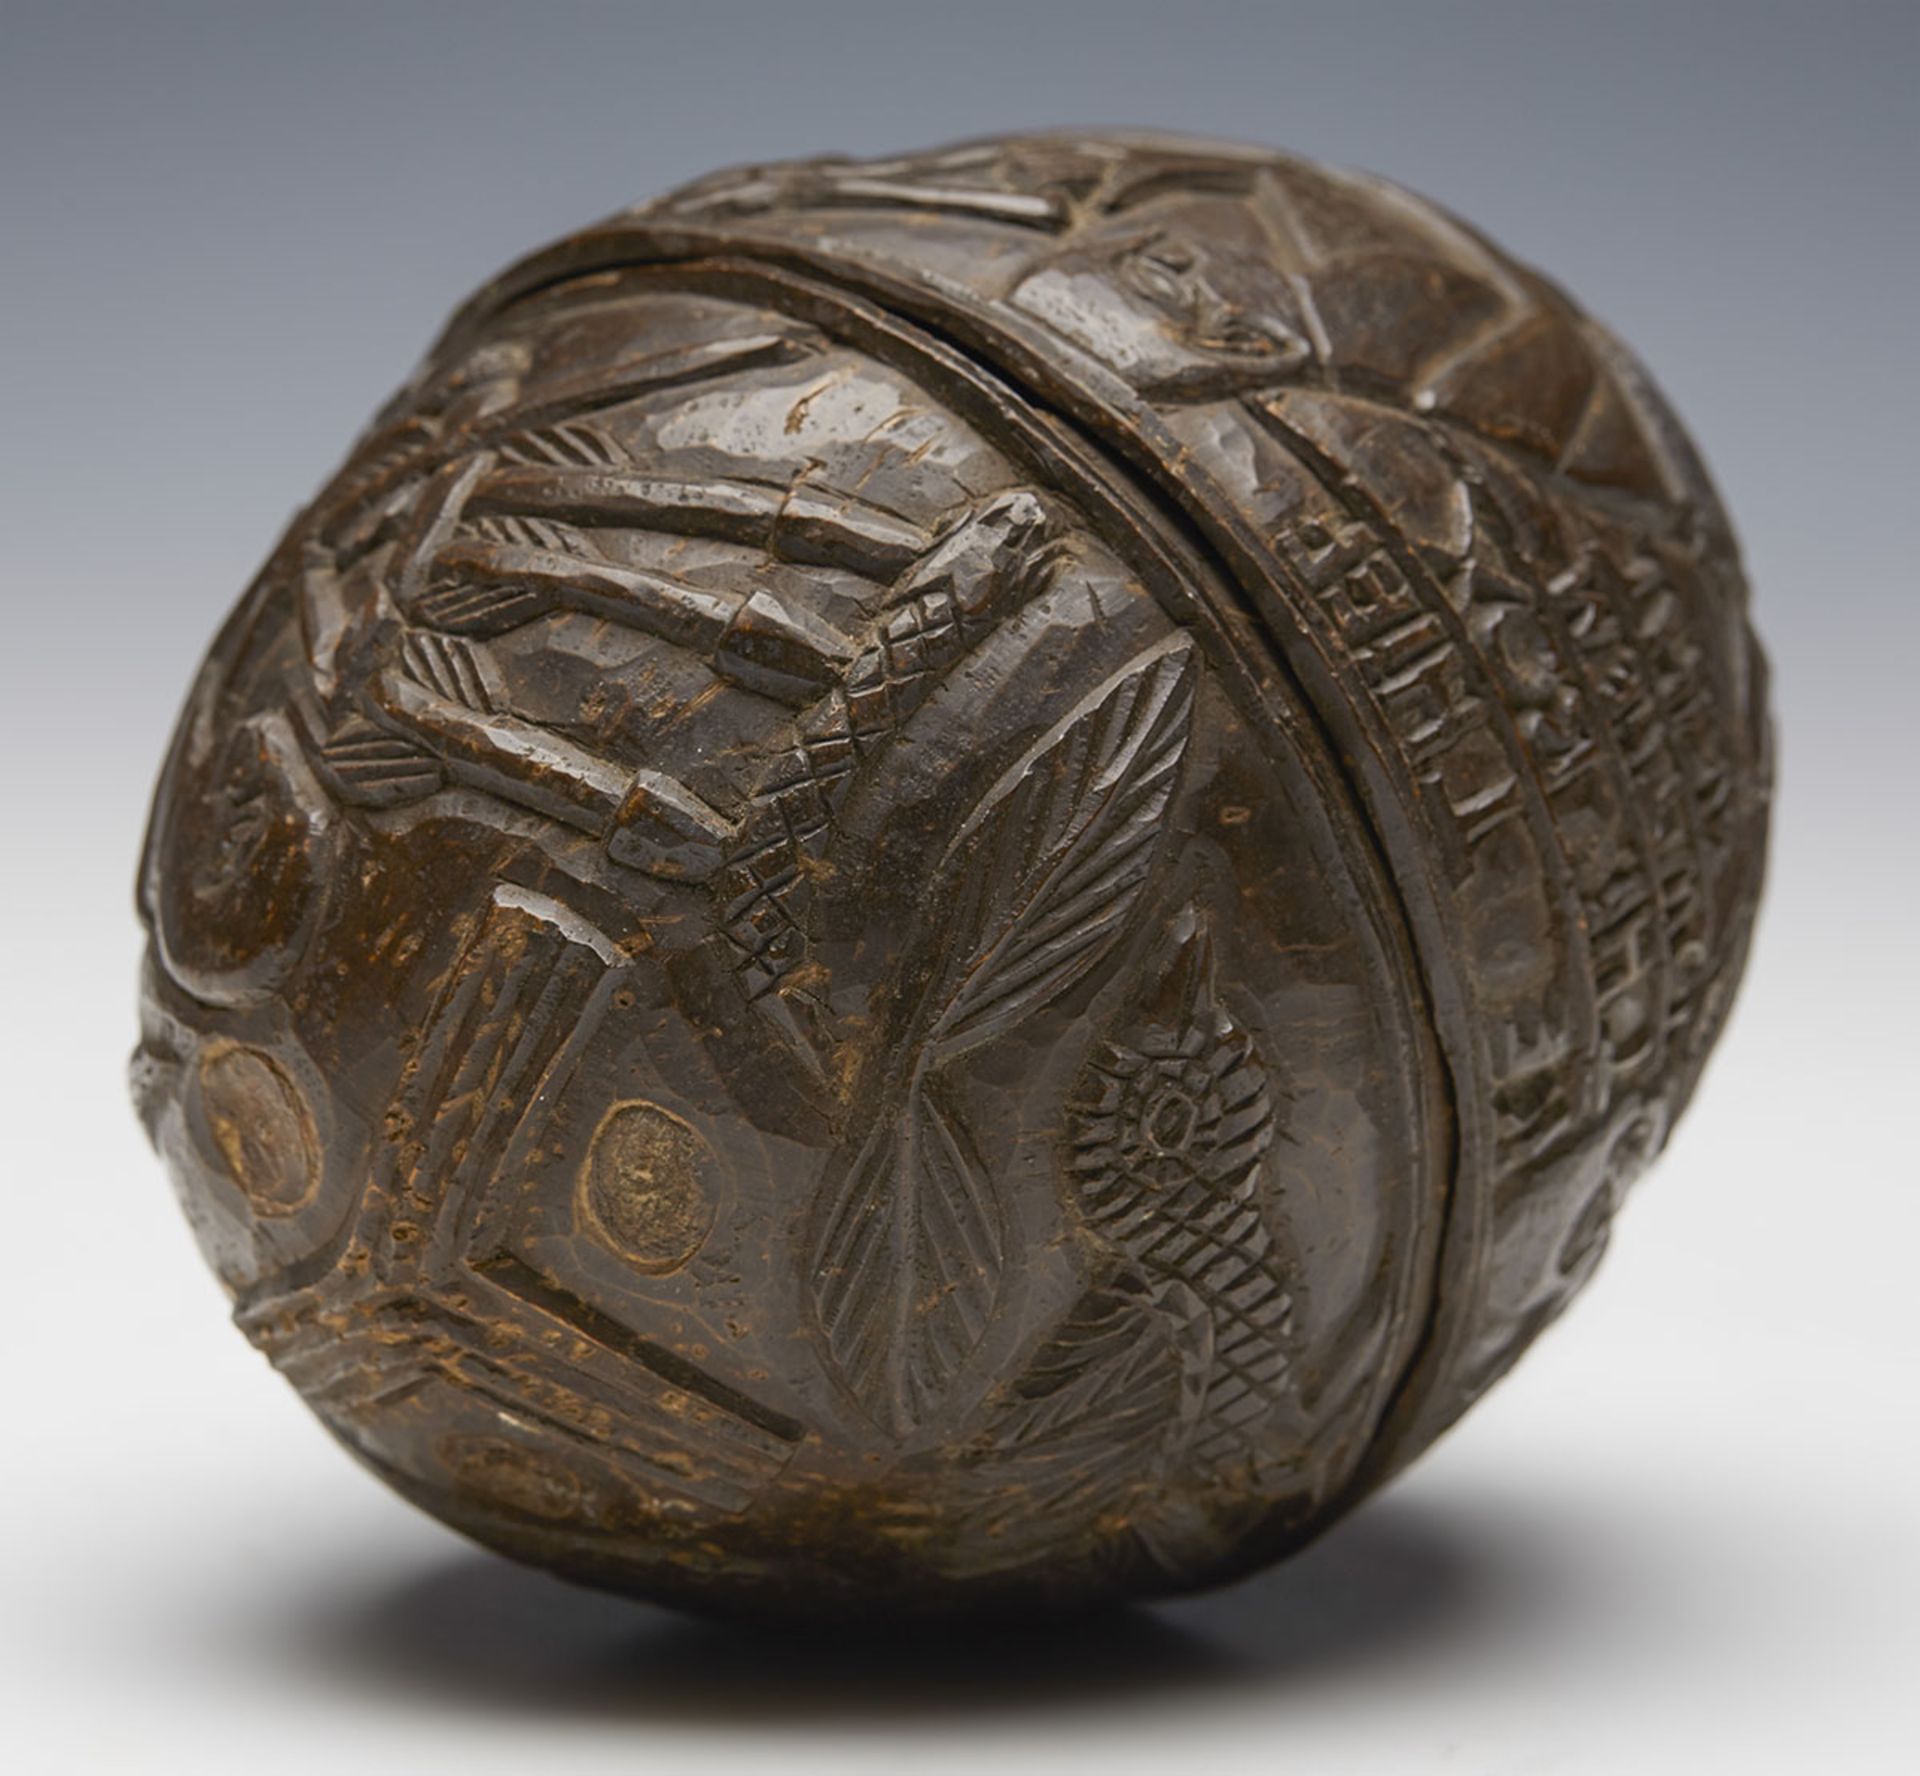 ANTIQUE BENIN CARVED COCONUT WITH PROVENANCE EARLY 20TH C. - Image 9 of 9